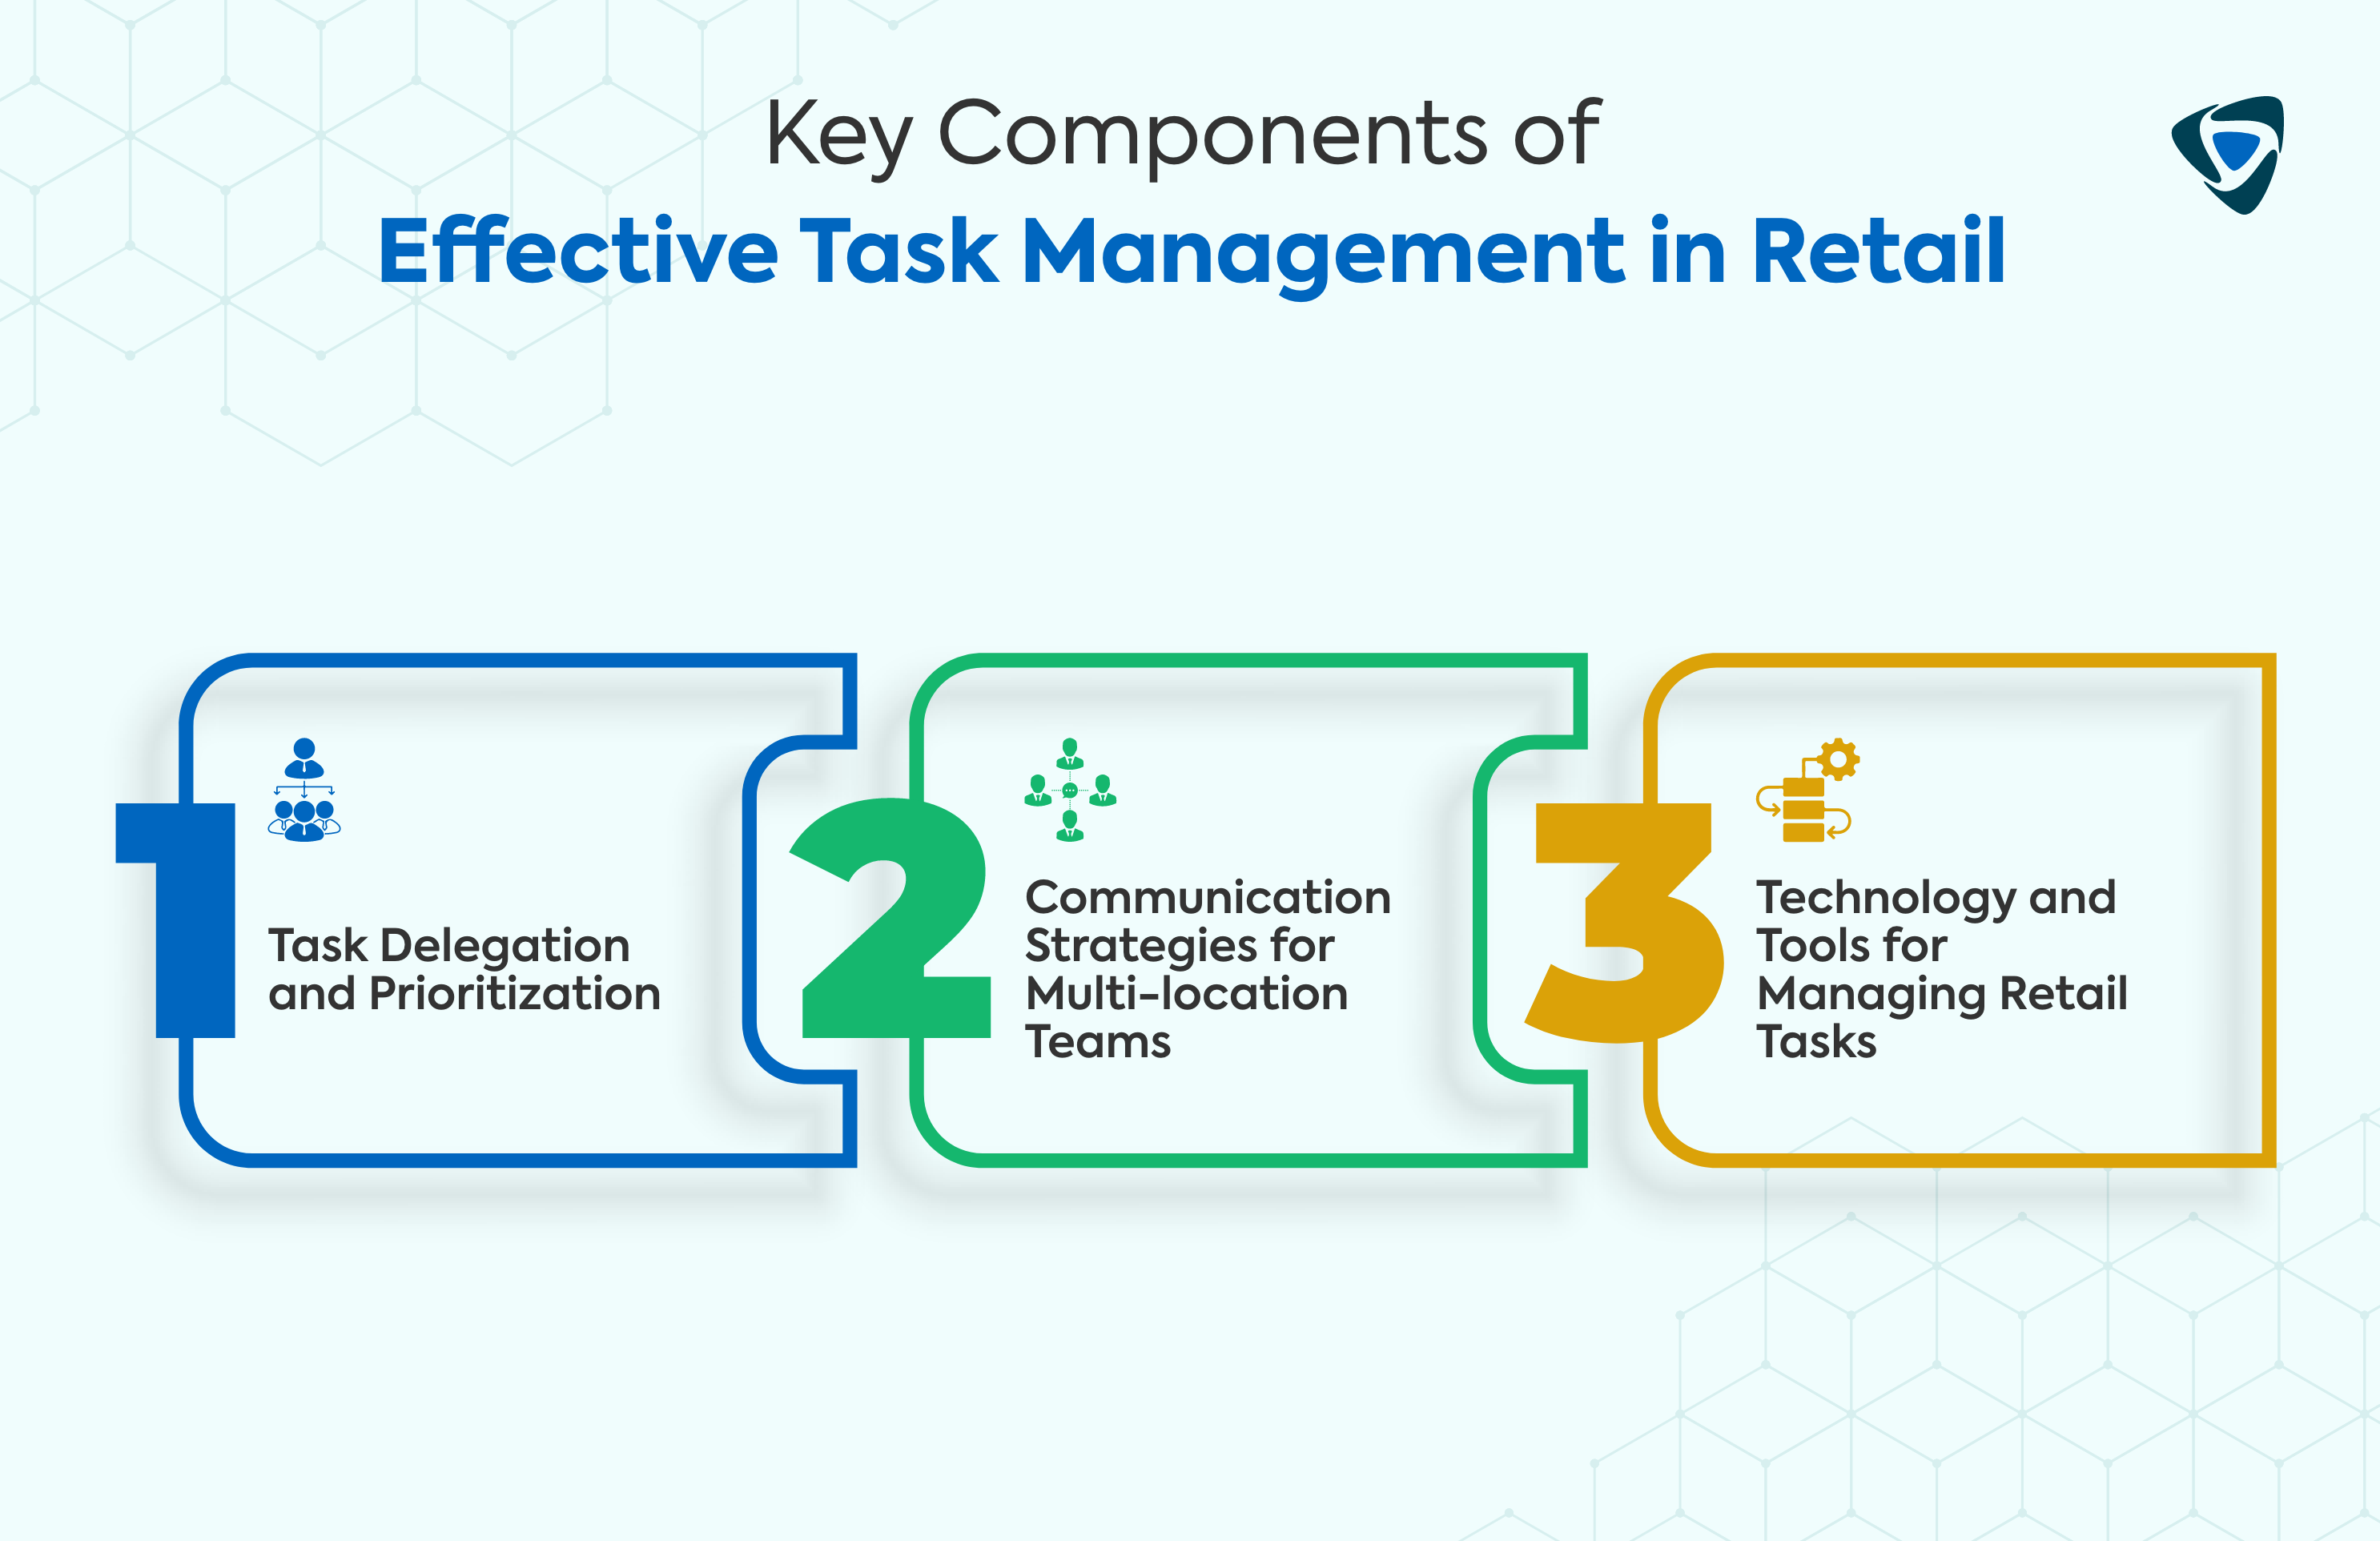 Key Components of Effective Task Management in Retail